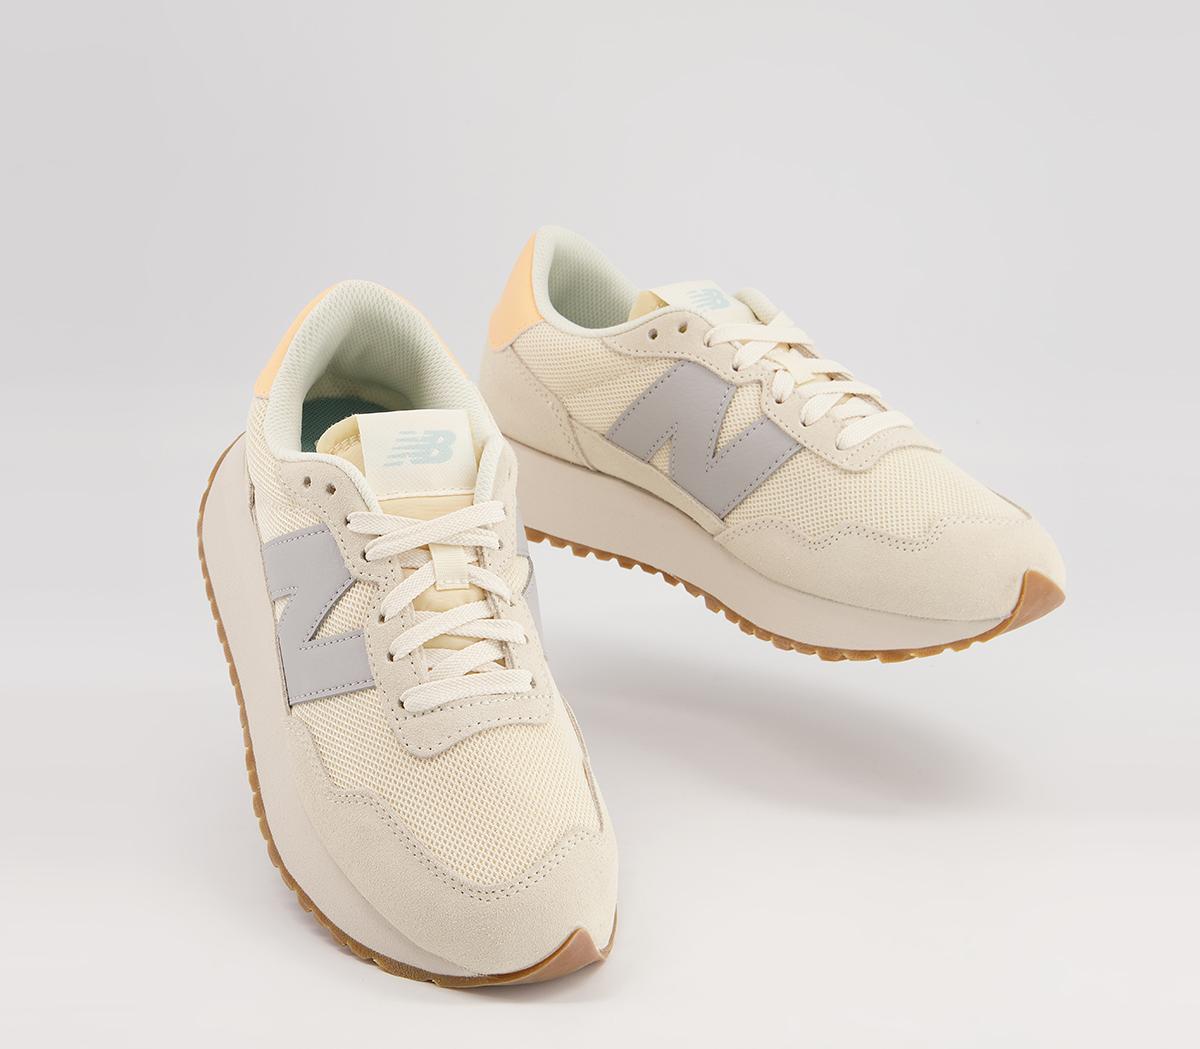 New Balance Ws237 Trainers Natural Grey Orange - Women's Trainers